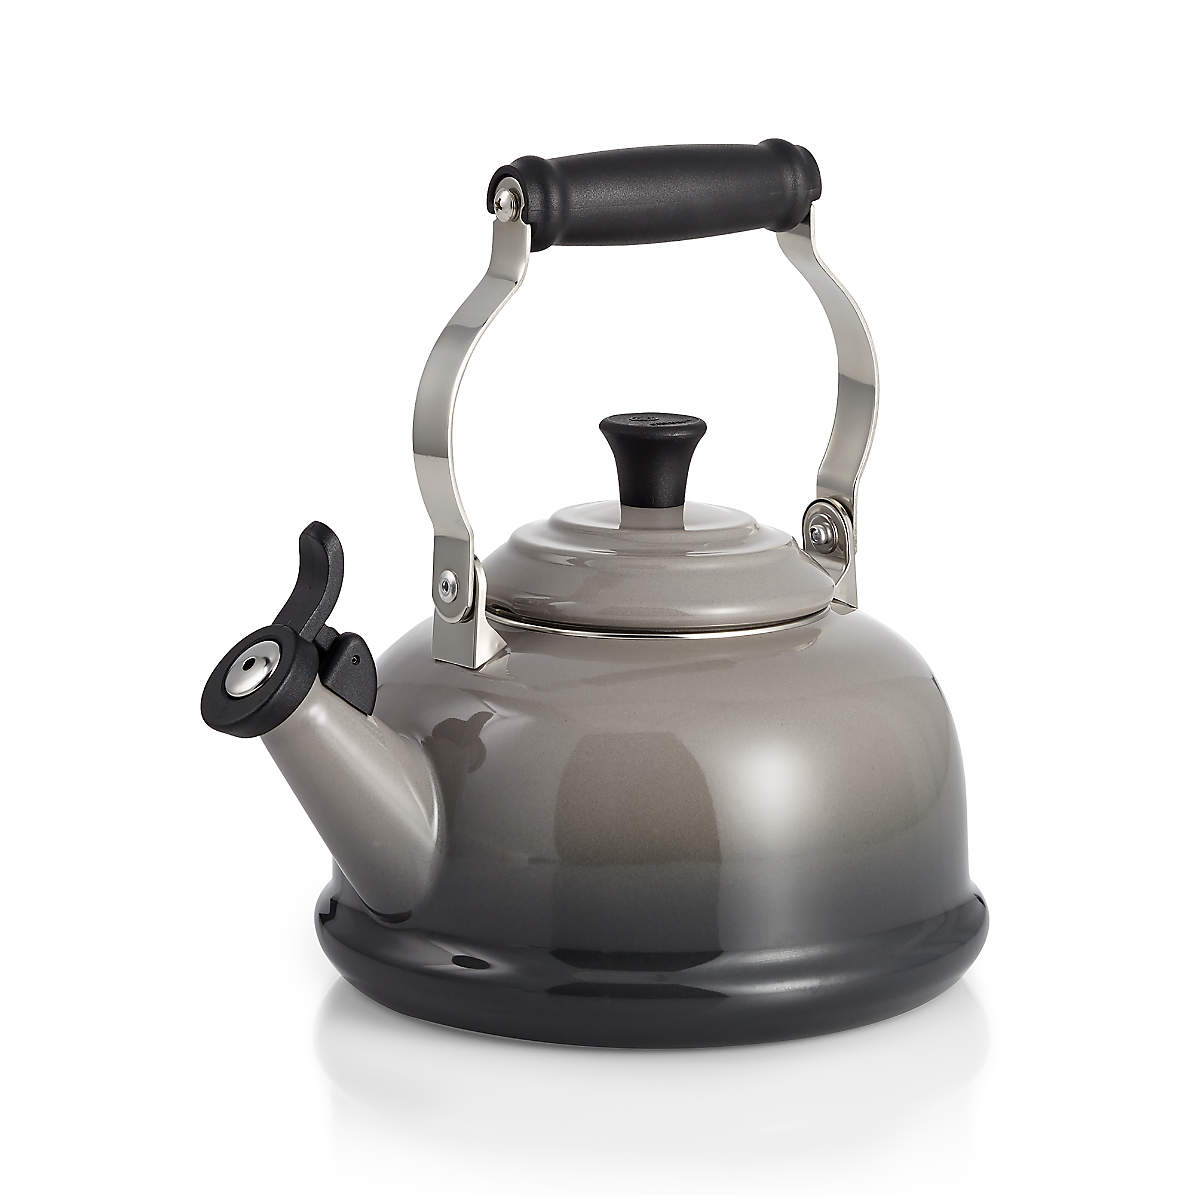 Le Creuset Classic Whistling Kettle Review: Stunning, But Pricey